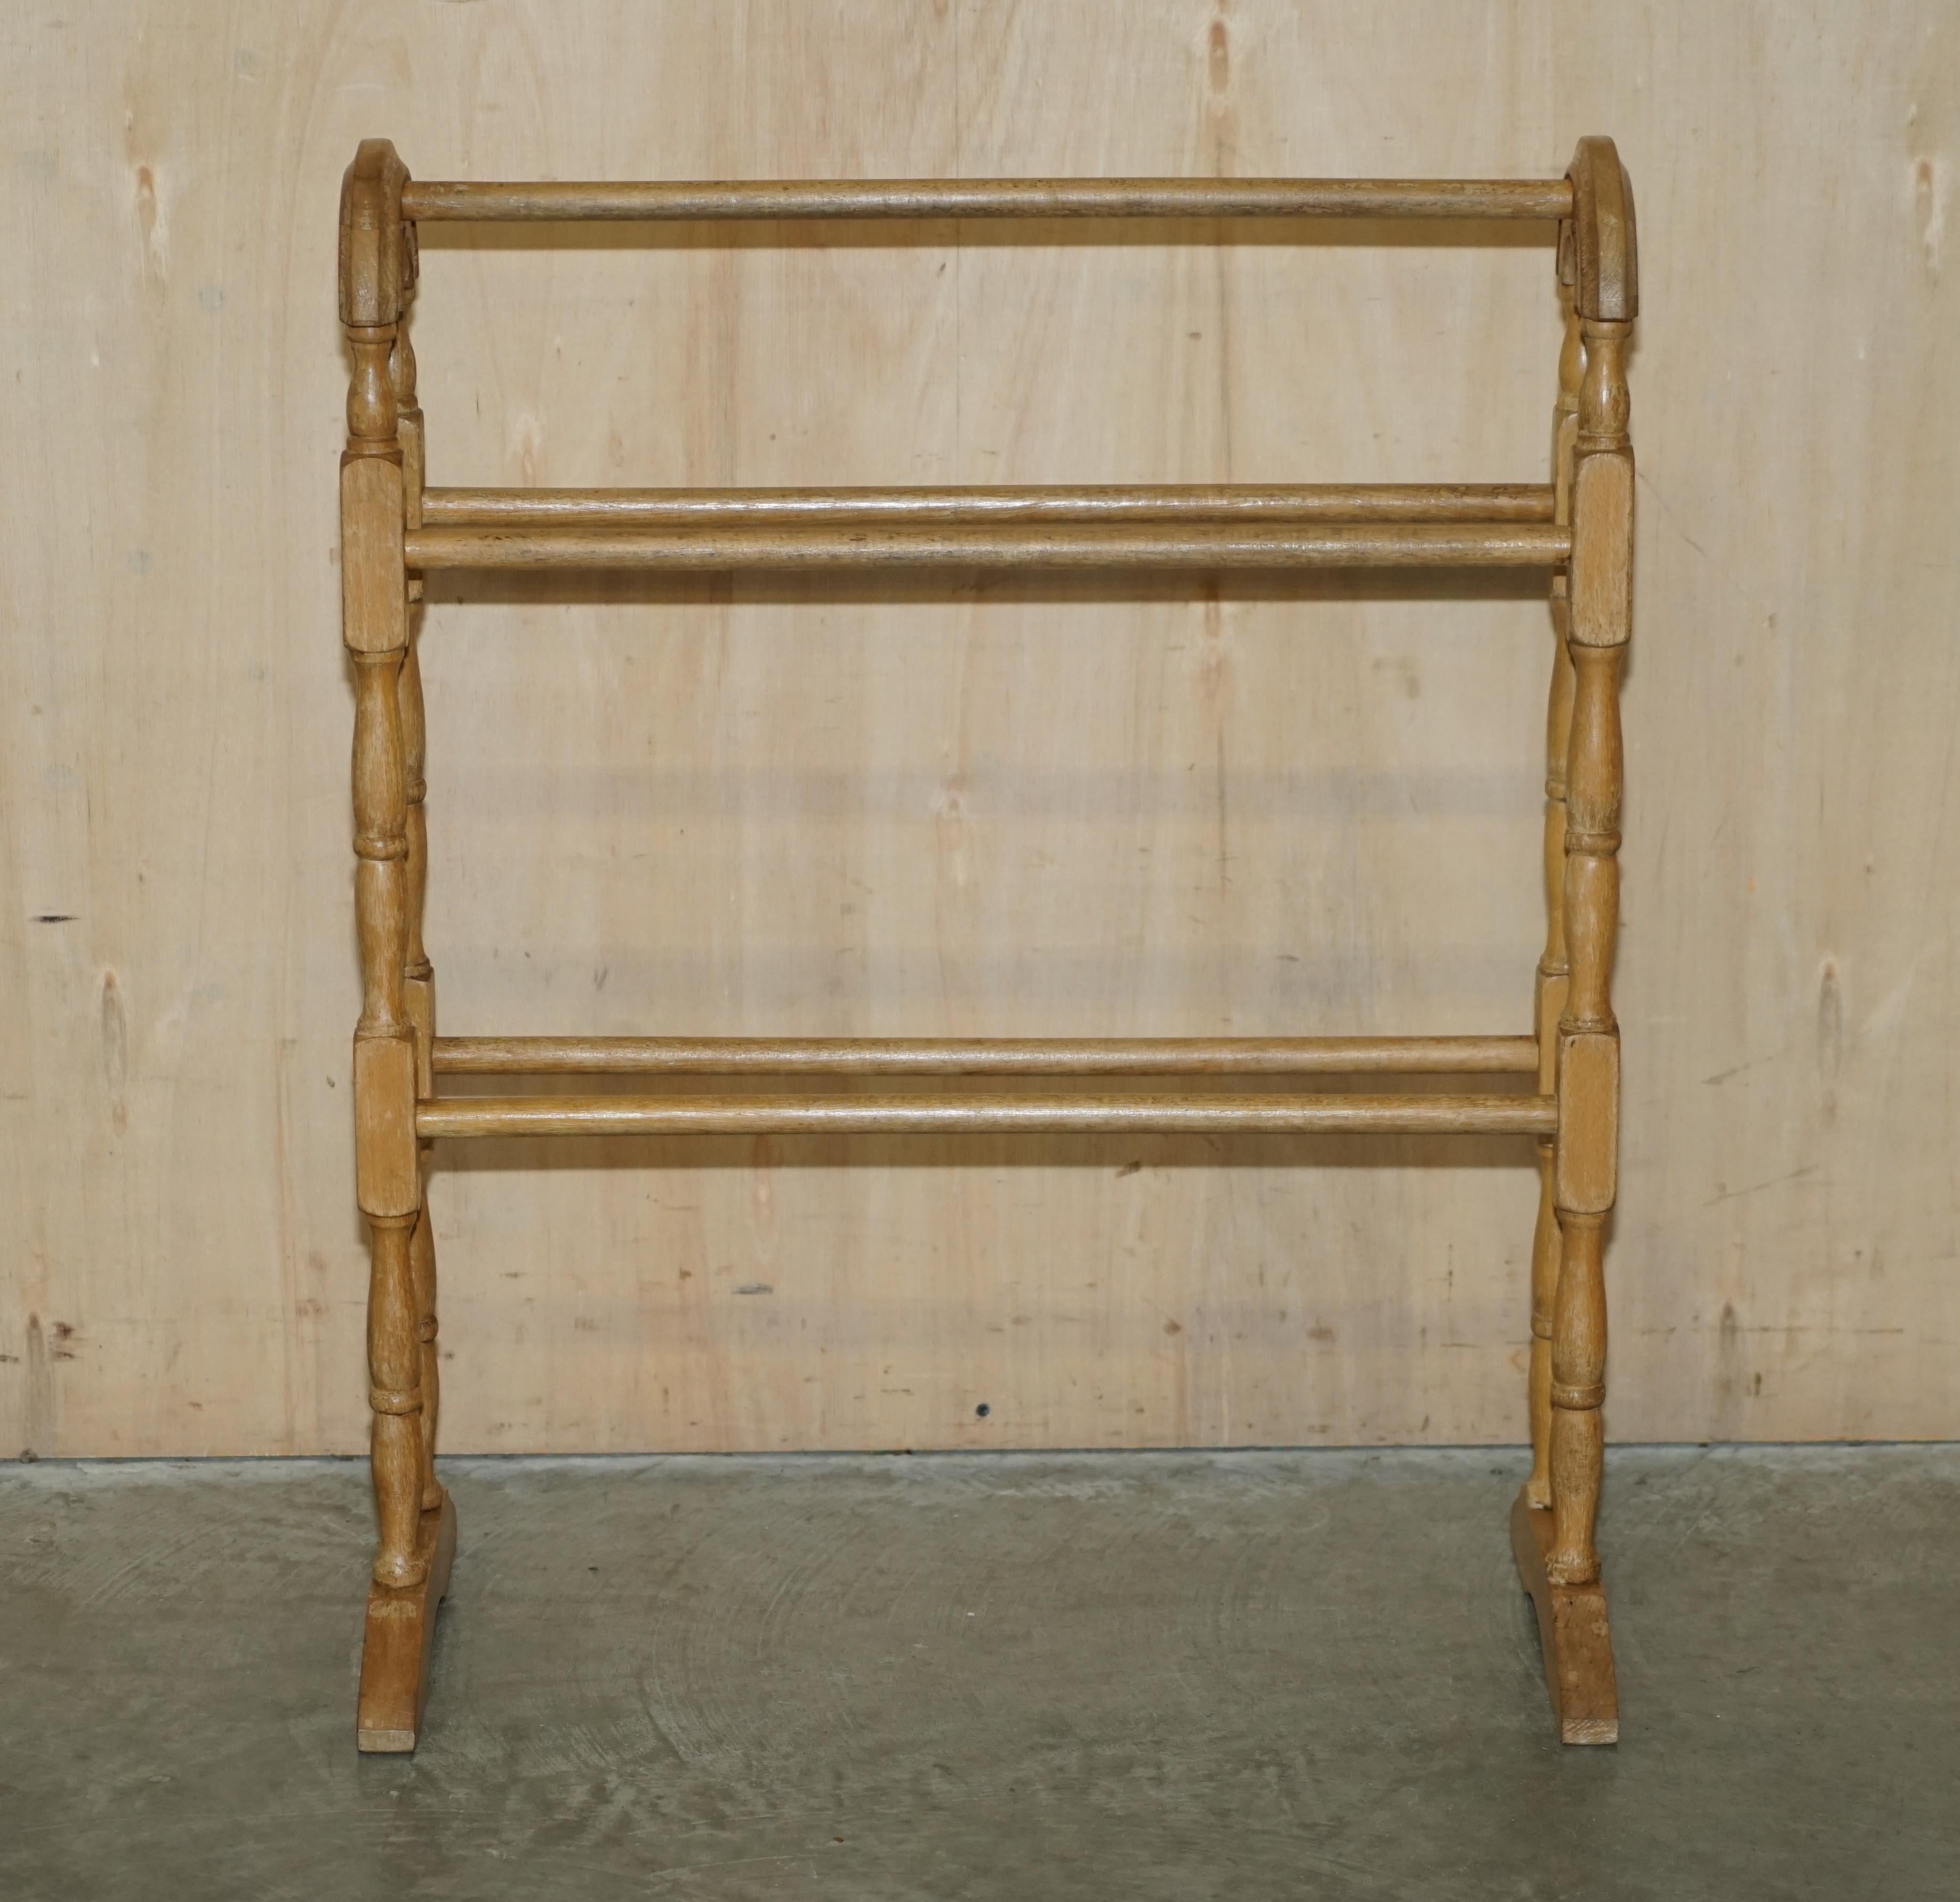 We are delighted to offer for sale this stunning antique circa 1900 solid pine bathroom towel rail with nicely antiqued finish

Please note the delivery fee listed is just a guide, it covers within the M25 only for the UK and local Europe only for